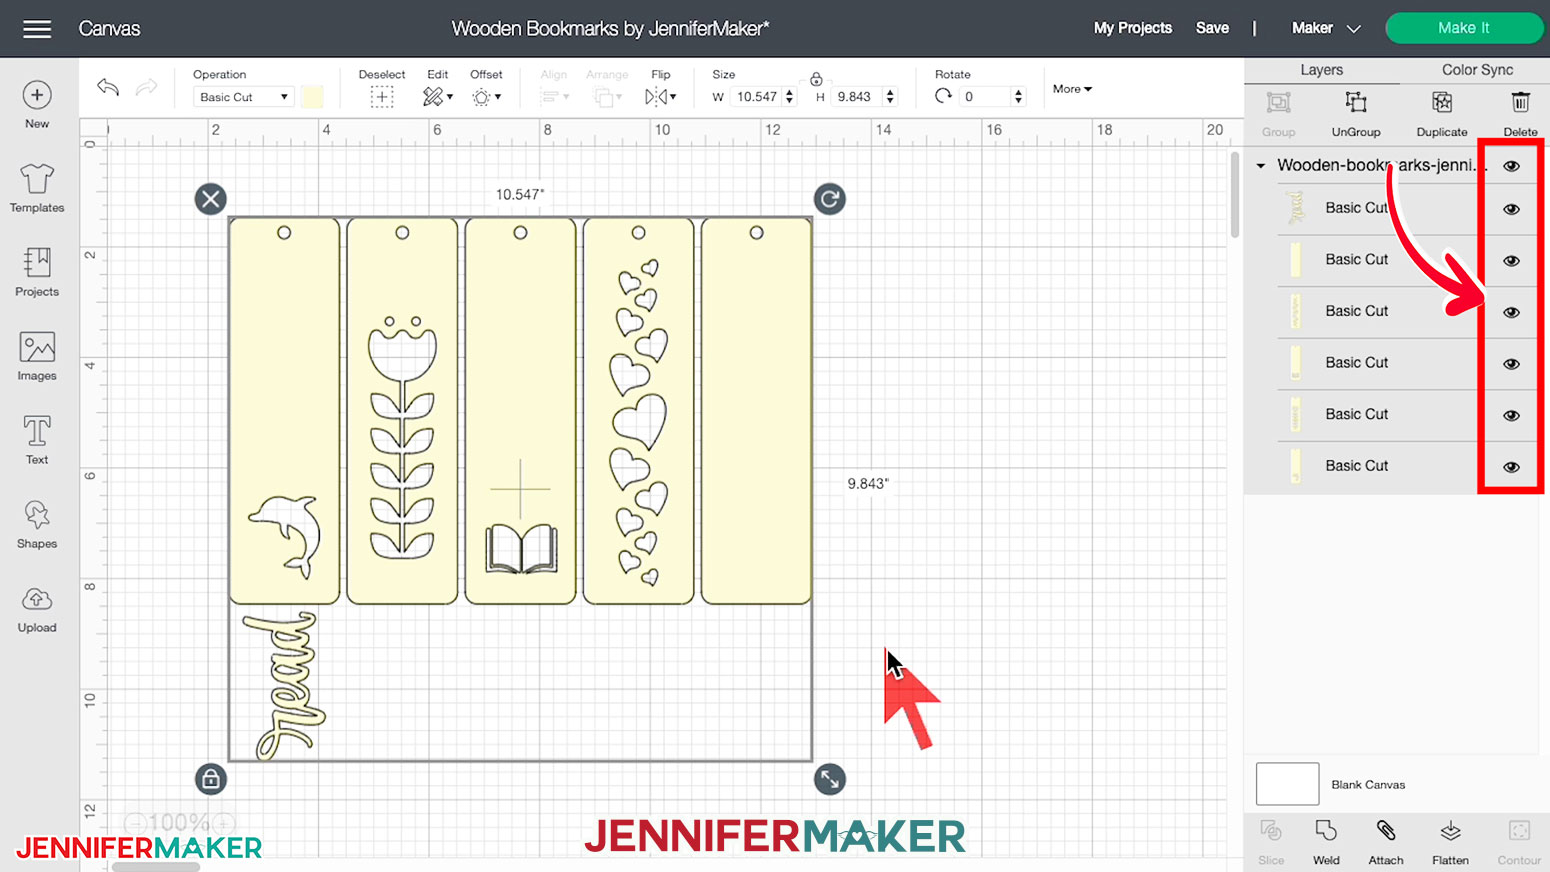 Hiding layers in Cricut Design Space when making wooden bookmarks